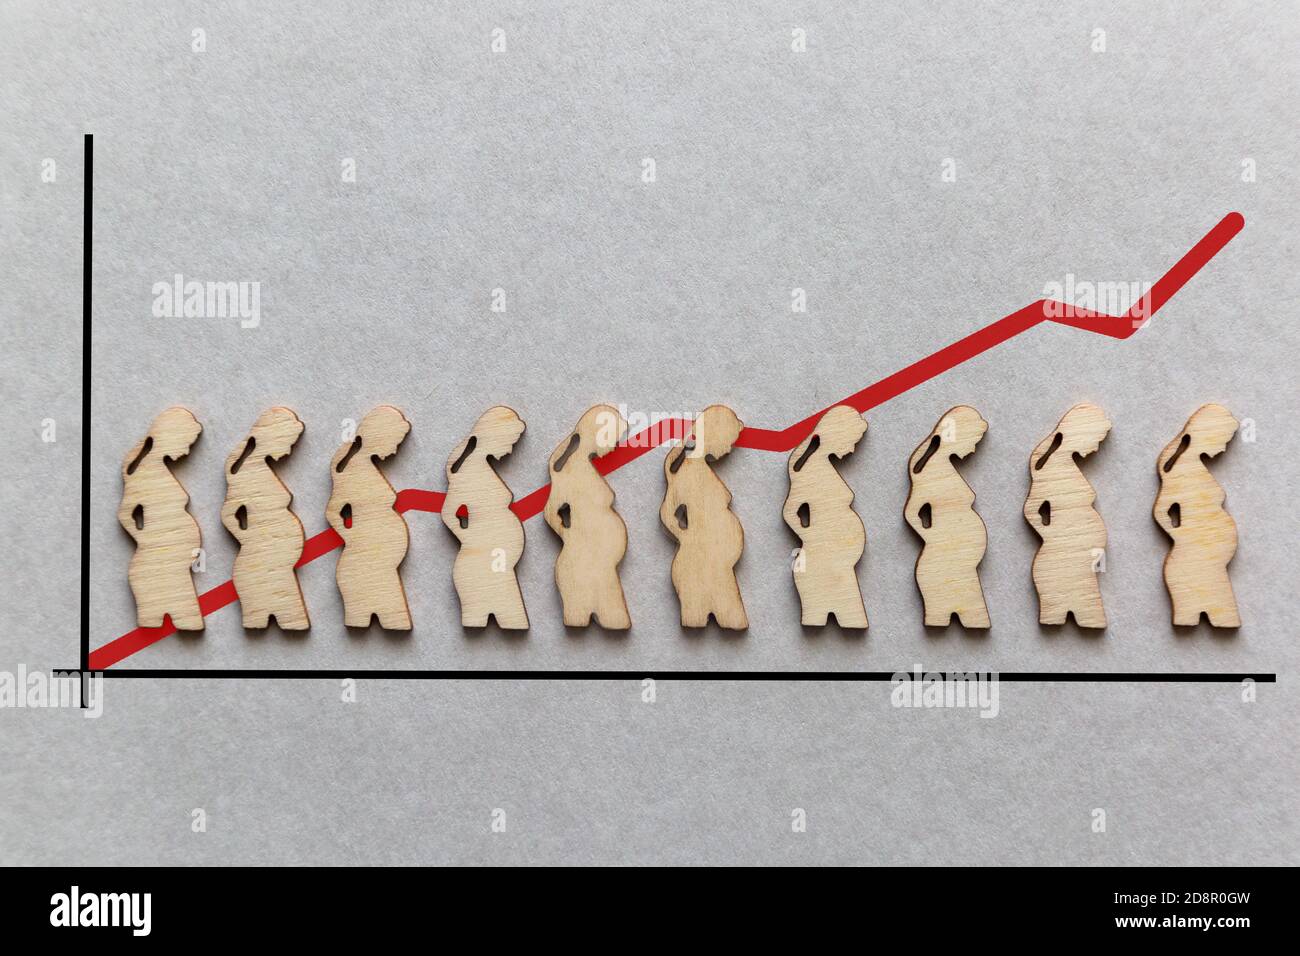 Population growth. Fertility chart of people in the country and the world. Concept. Stock Photo